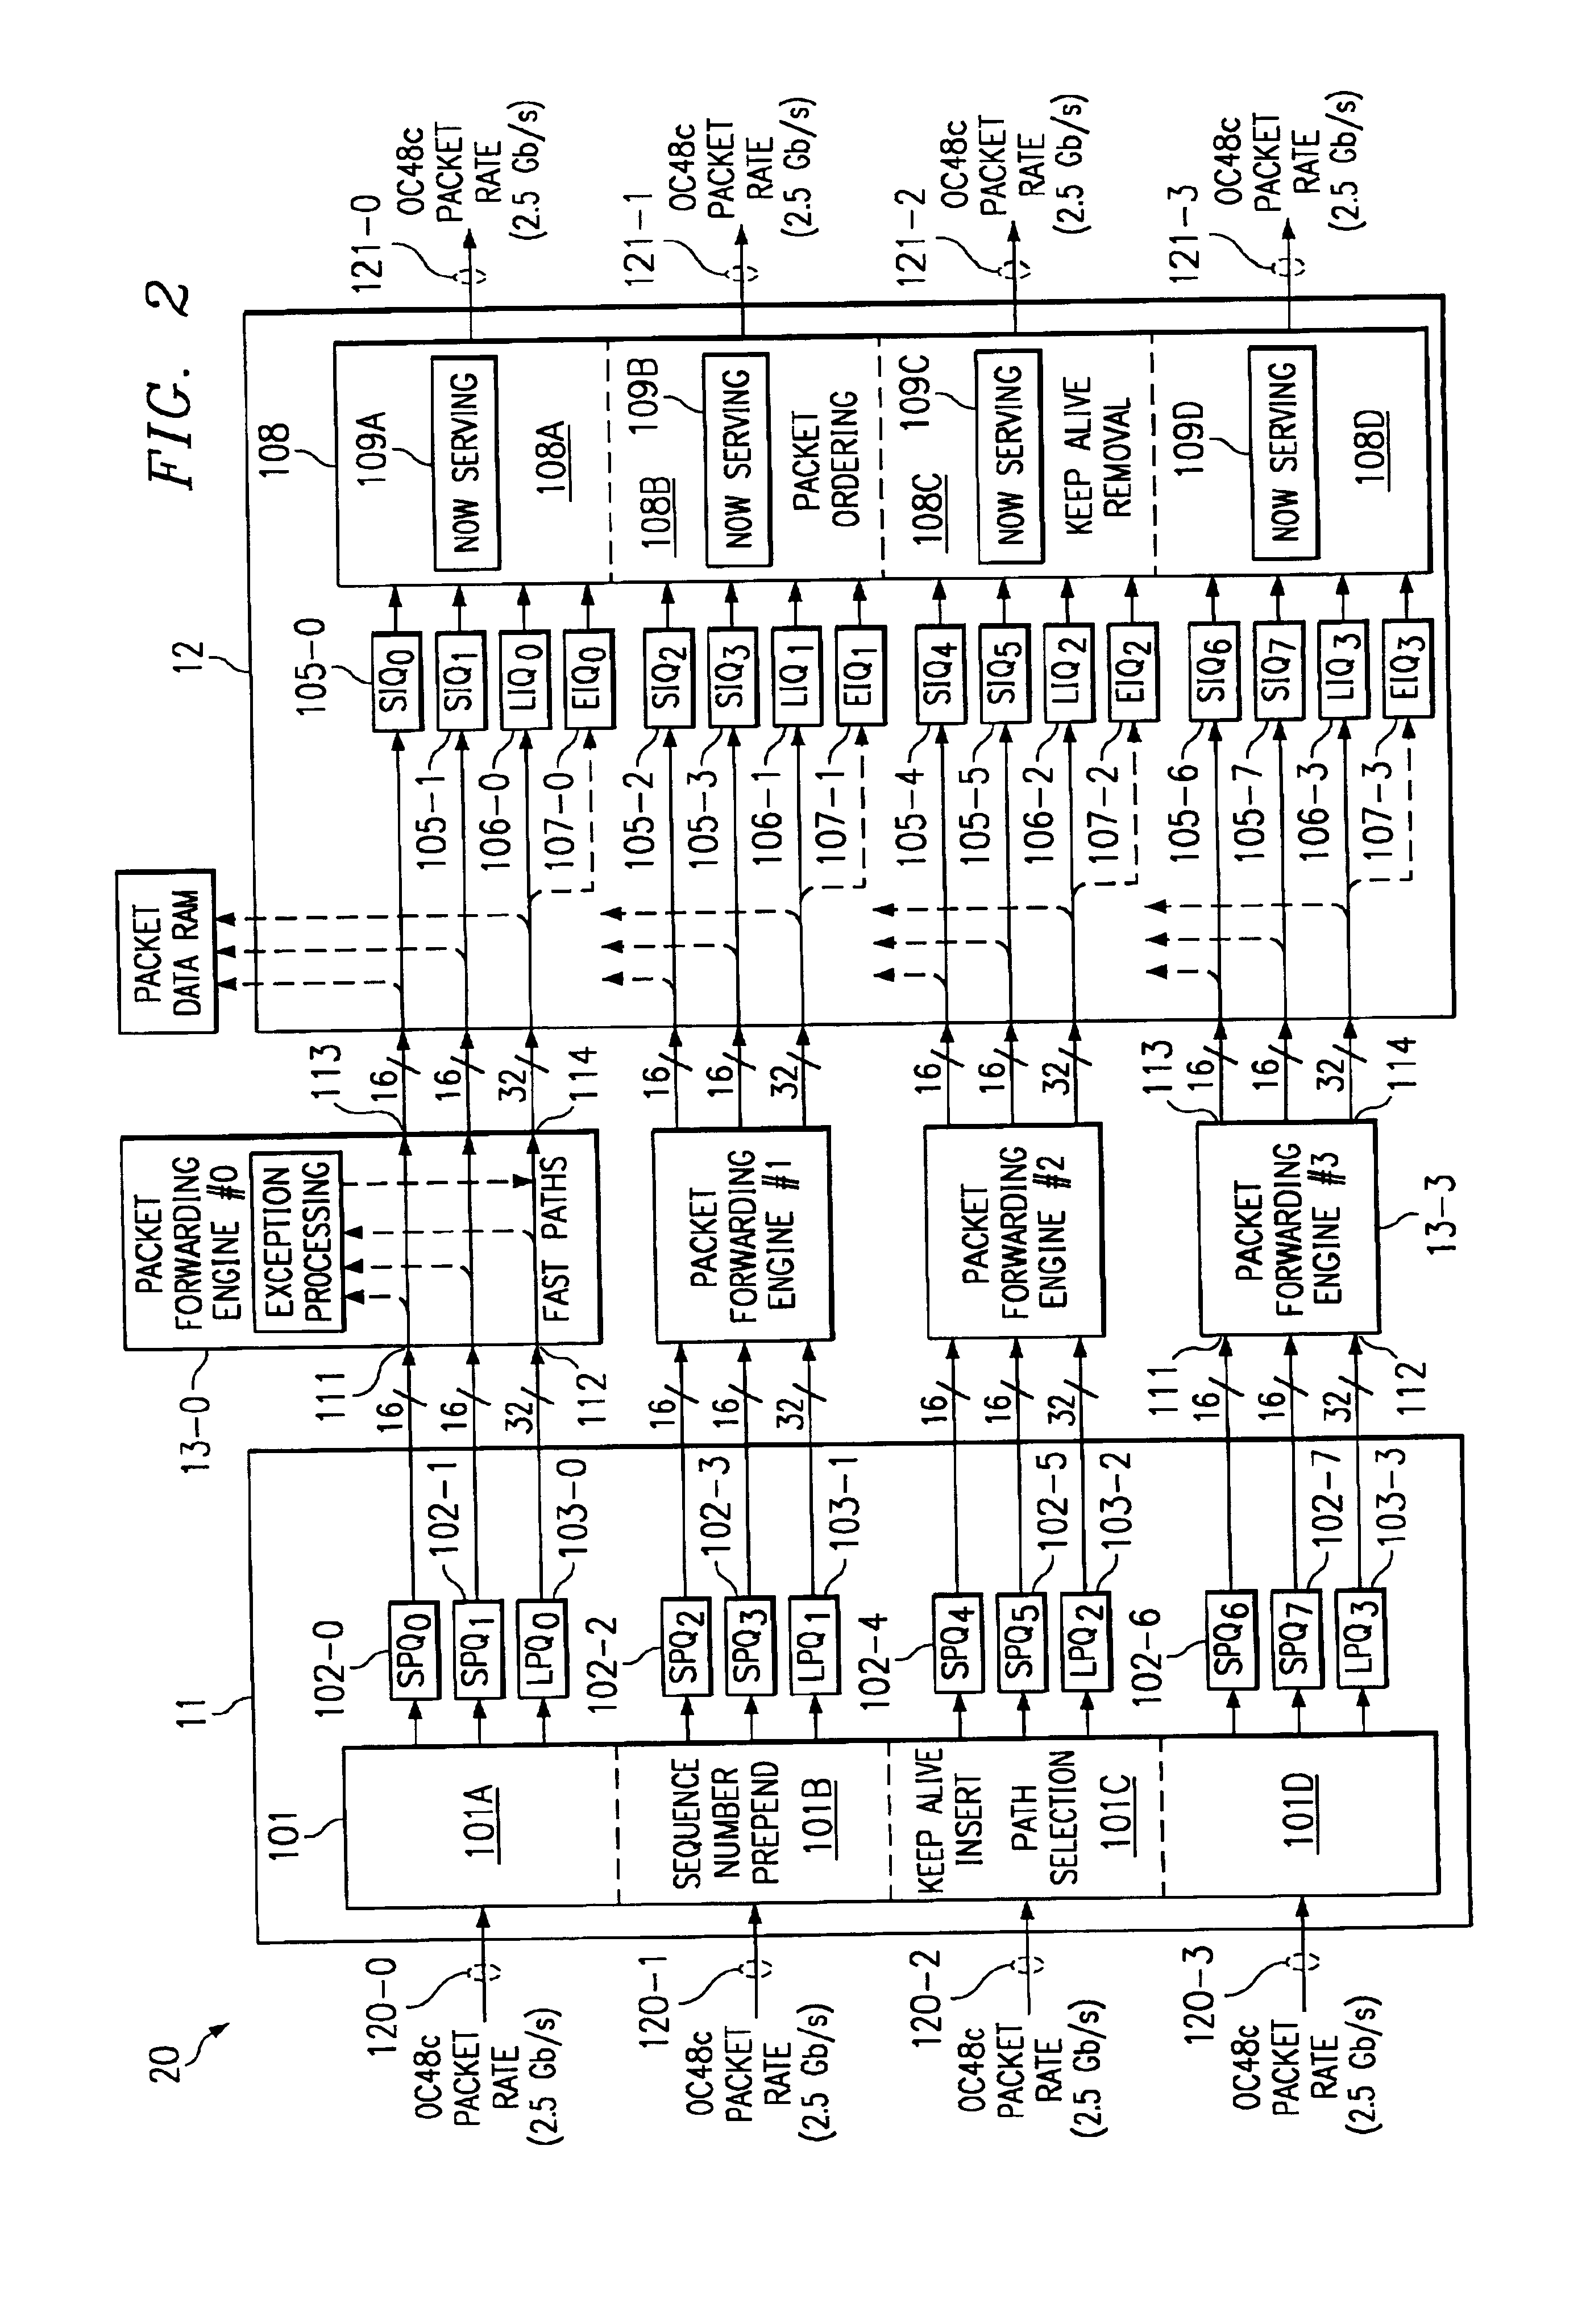 System and method for router packet control and ordering